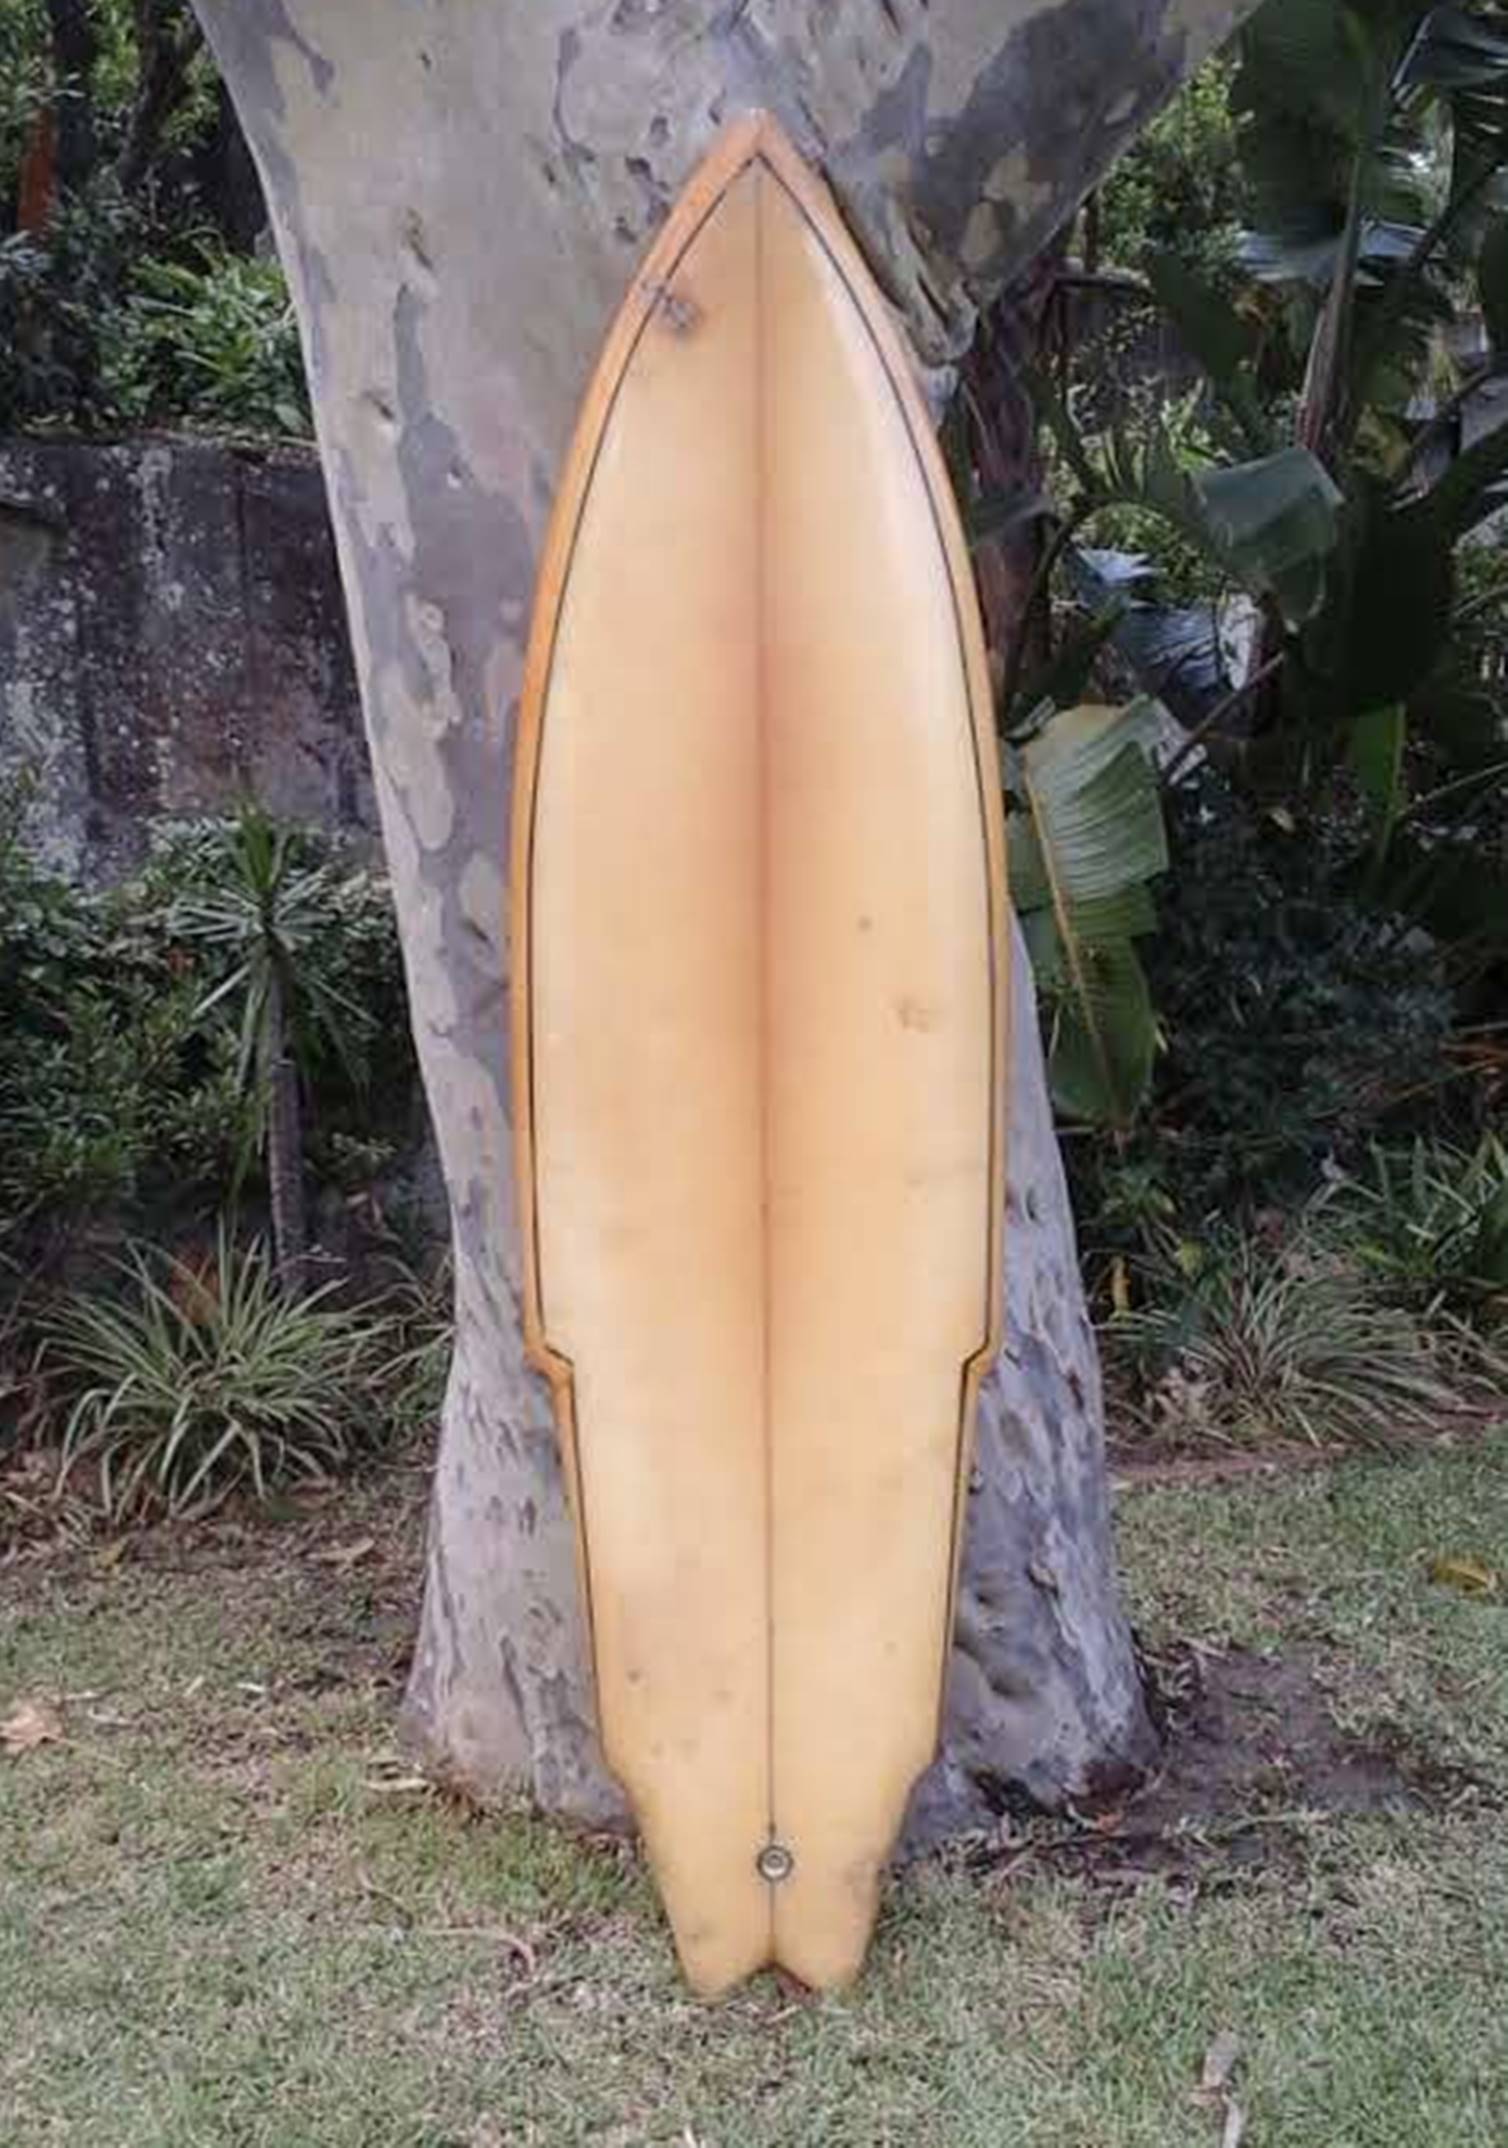 SOLD – 6′ 6″ Sting Single Fin